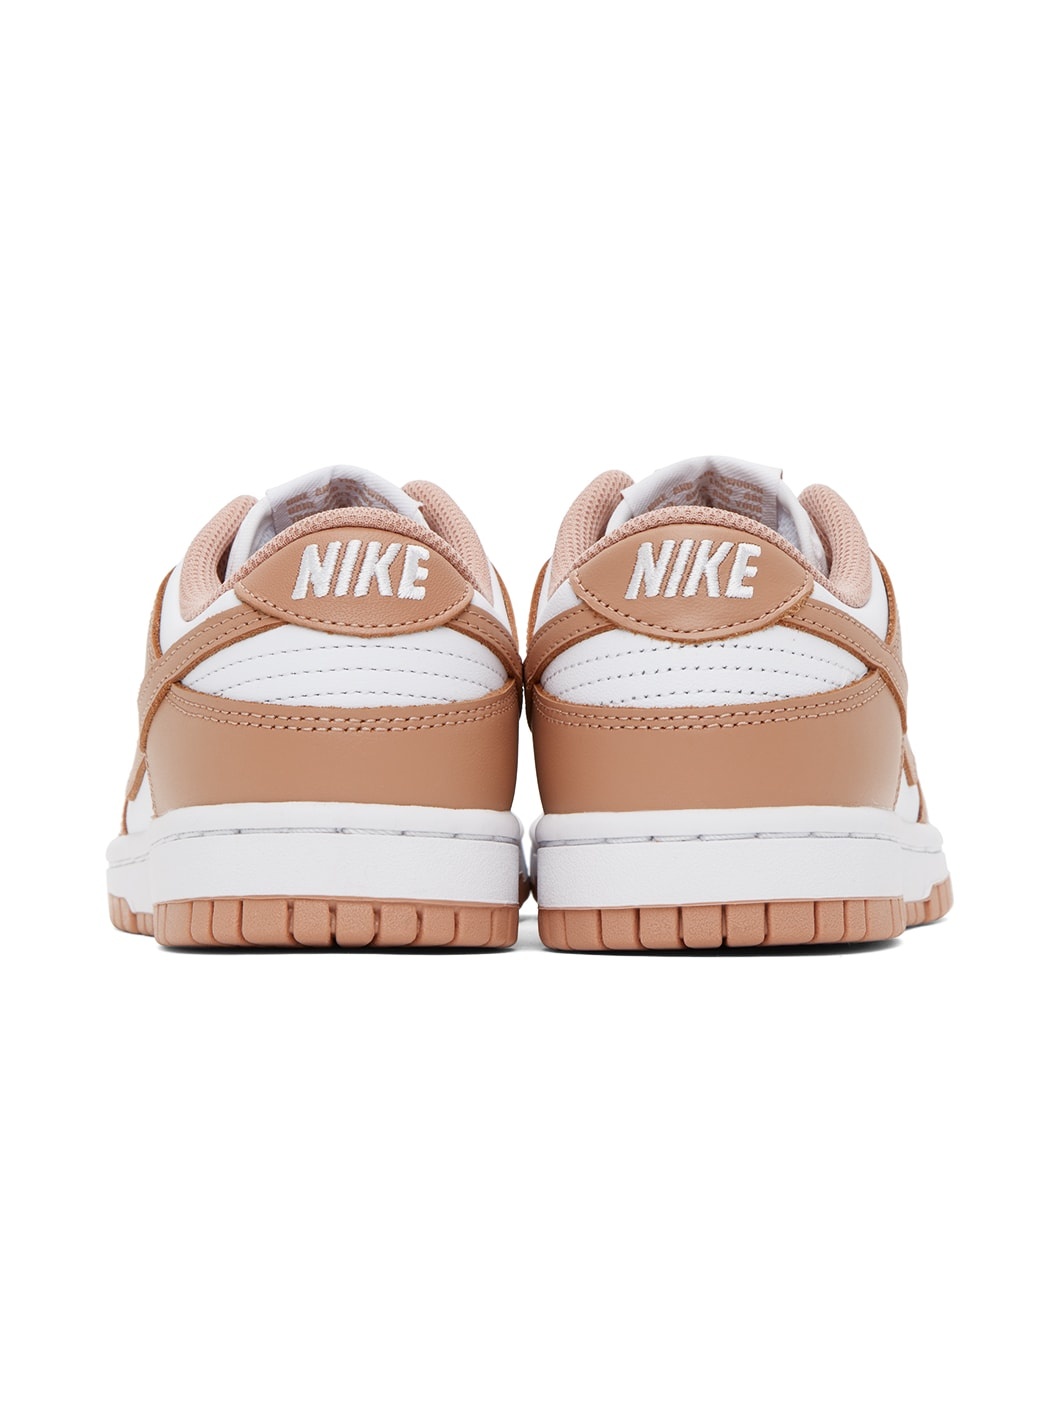 White & Beige Dunk Low By You Sneakers - 2